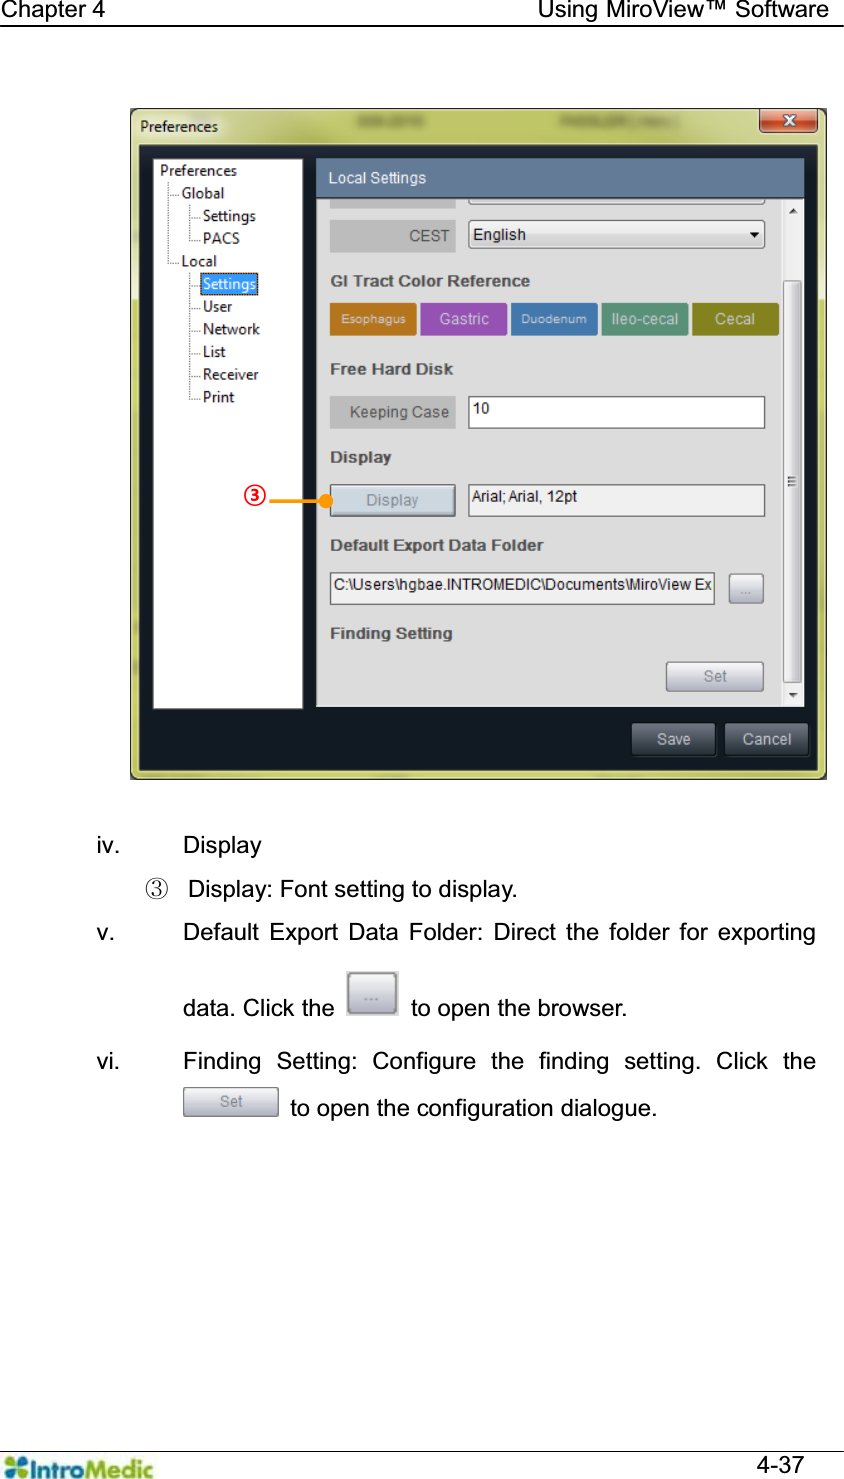   Chapter 4                                    Using 0LUR9LHZ Software  4-37  iv. Display ཝ  Display: Font setting to display. v.  Default Export Data Folder: Direct the folder for exporting data. Click the    to open the browser. vi.  Finding Setting: Configure the finding setting. Click the   to open the configuration dialogue. ¤ 